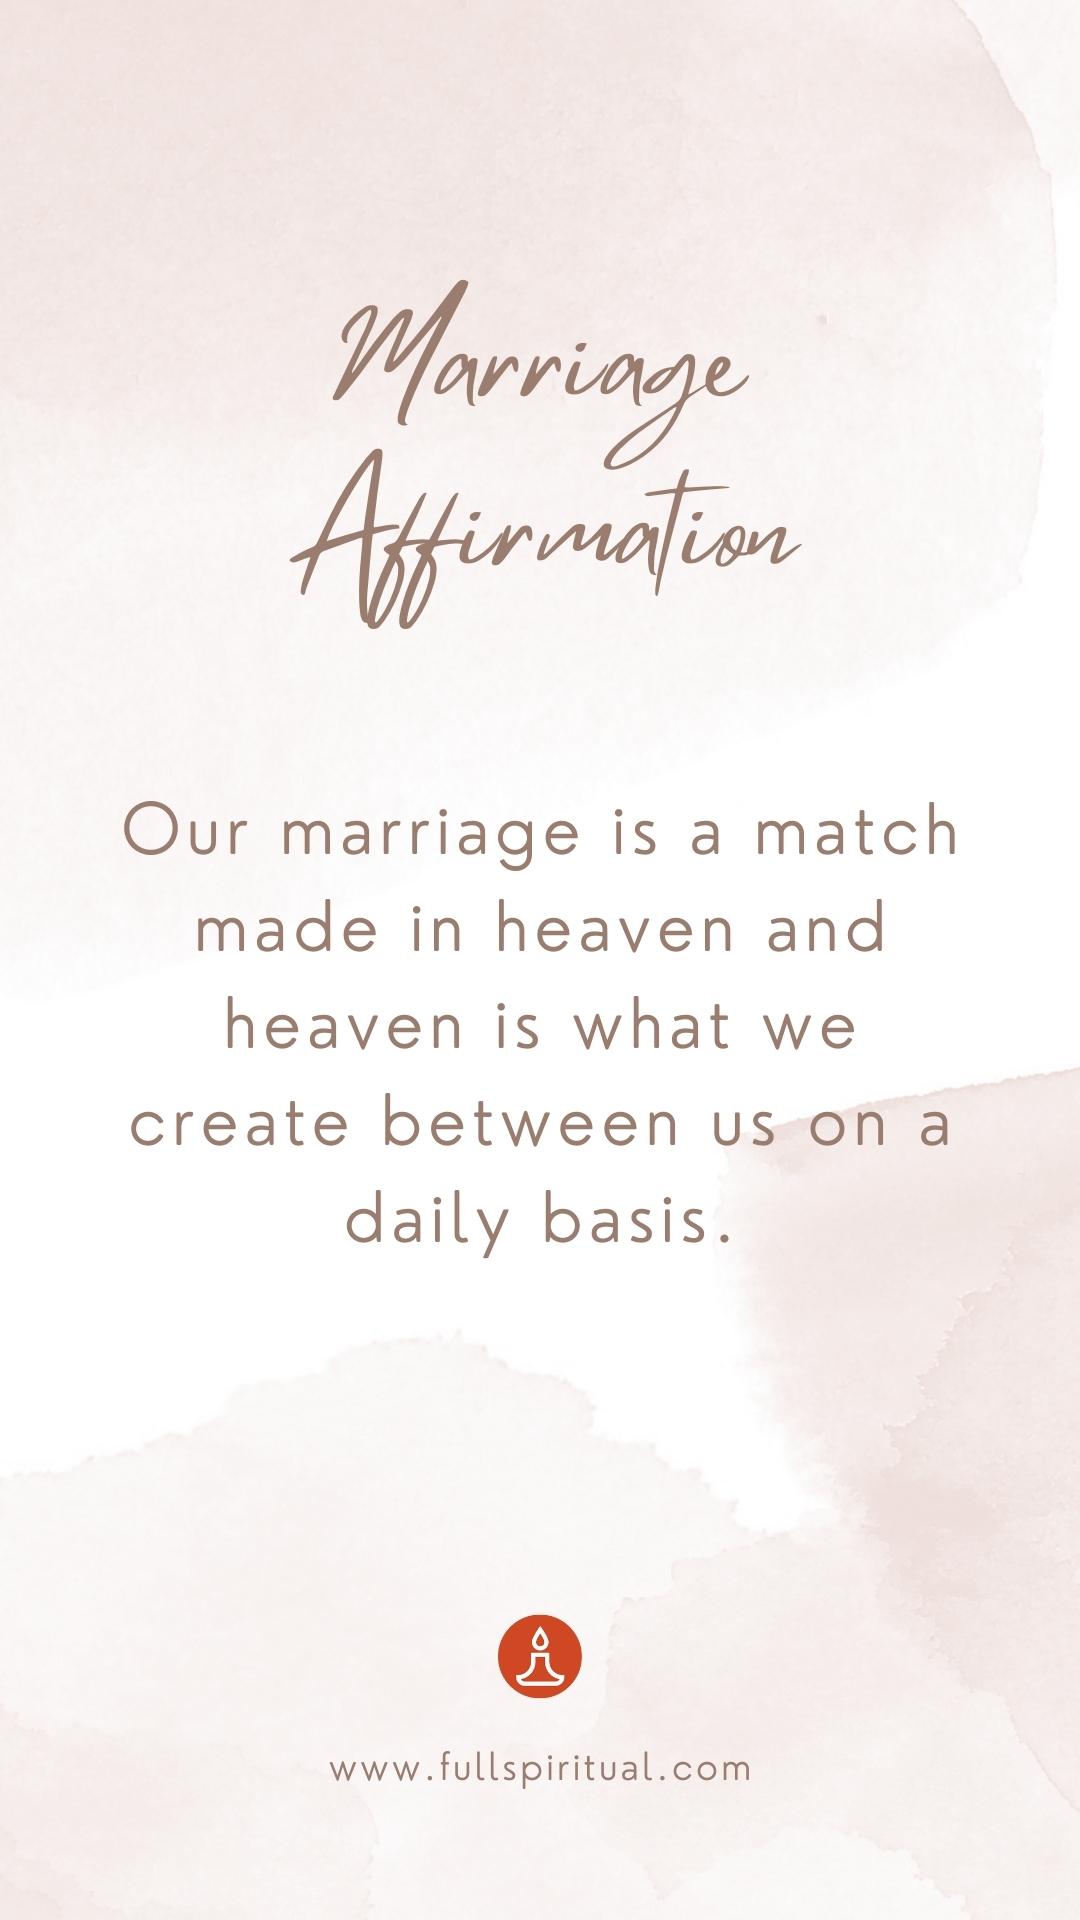 husband and wife affirmation